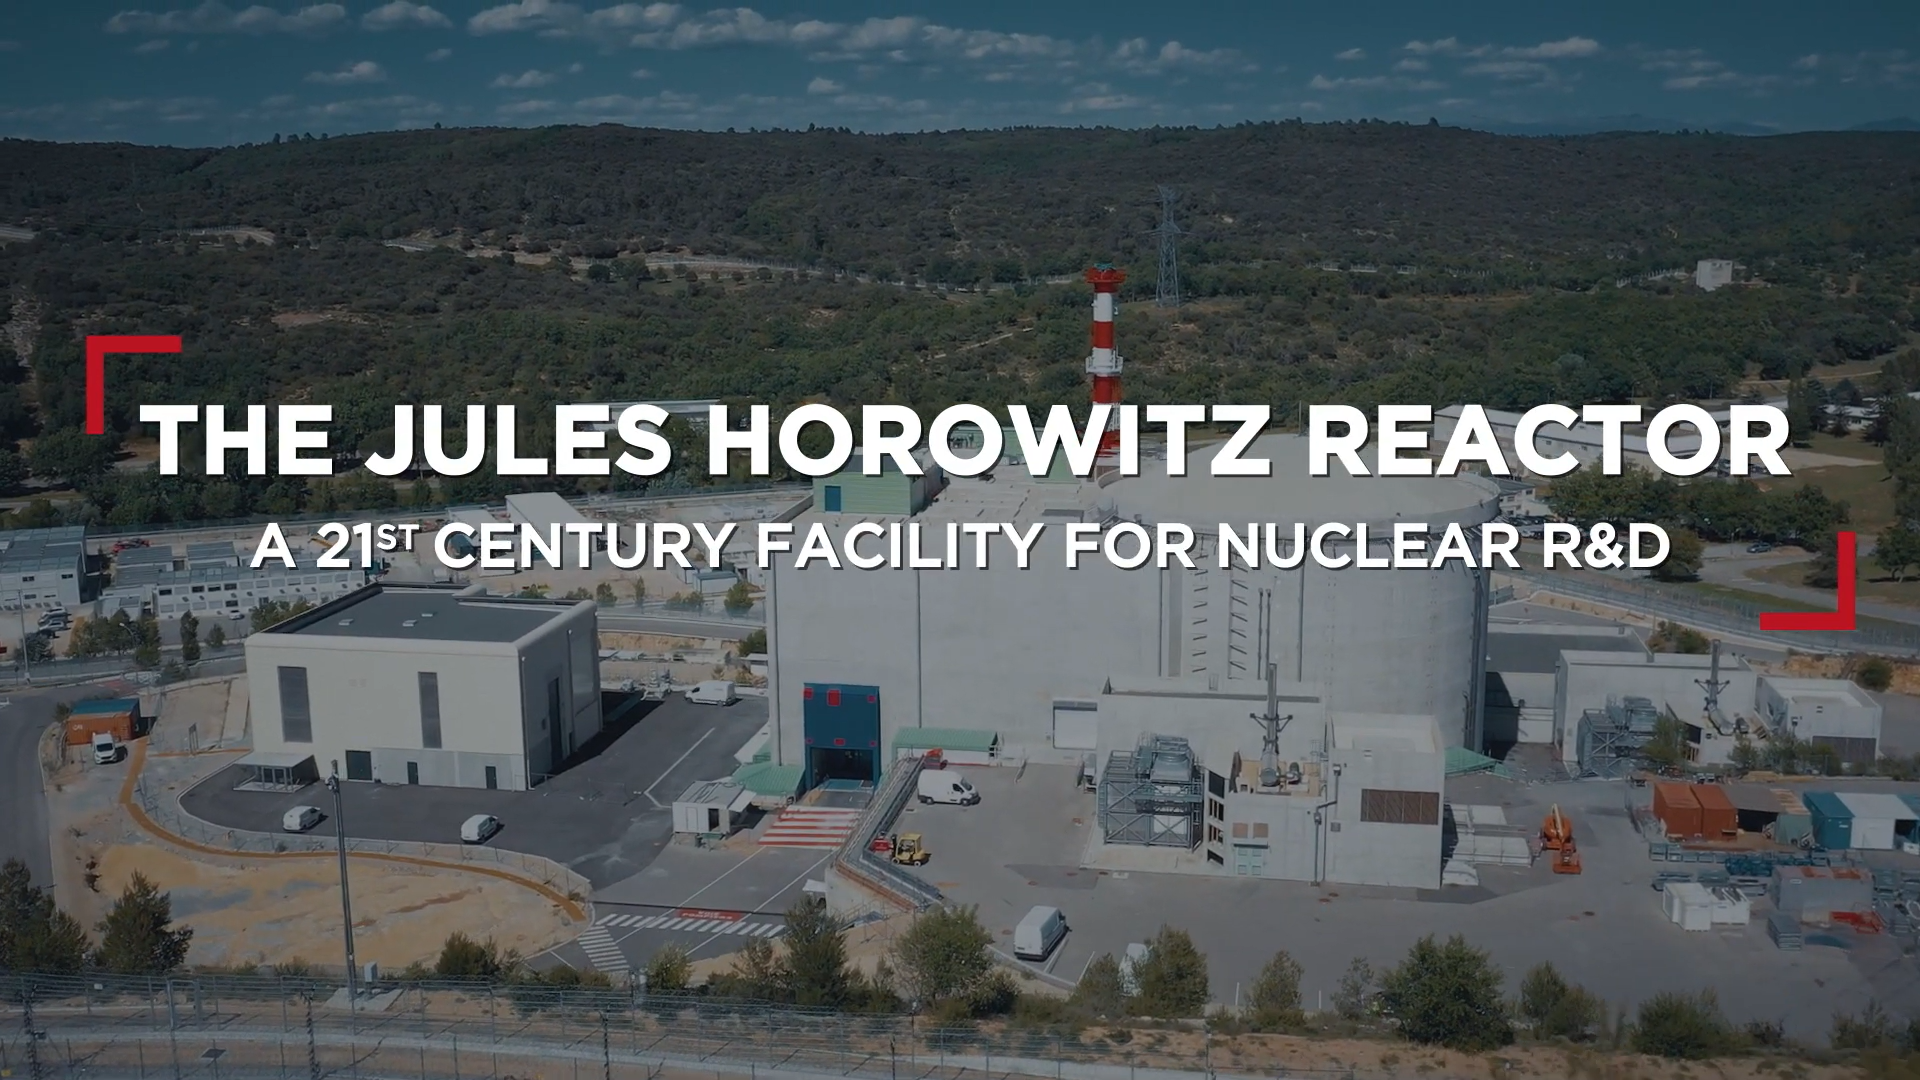 The Jules Horowitz Reactor and its experimental devices.